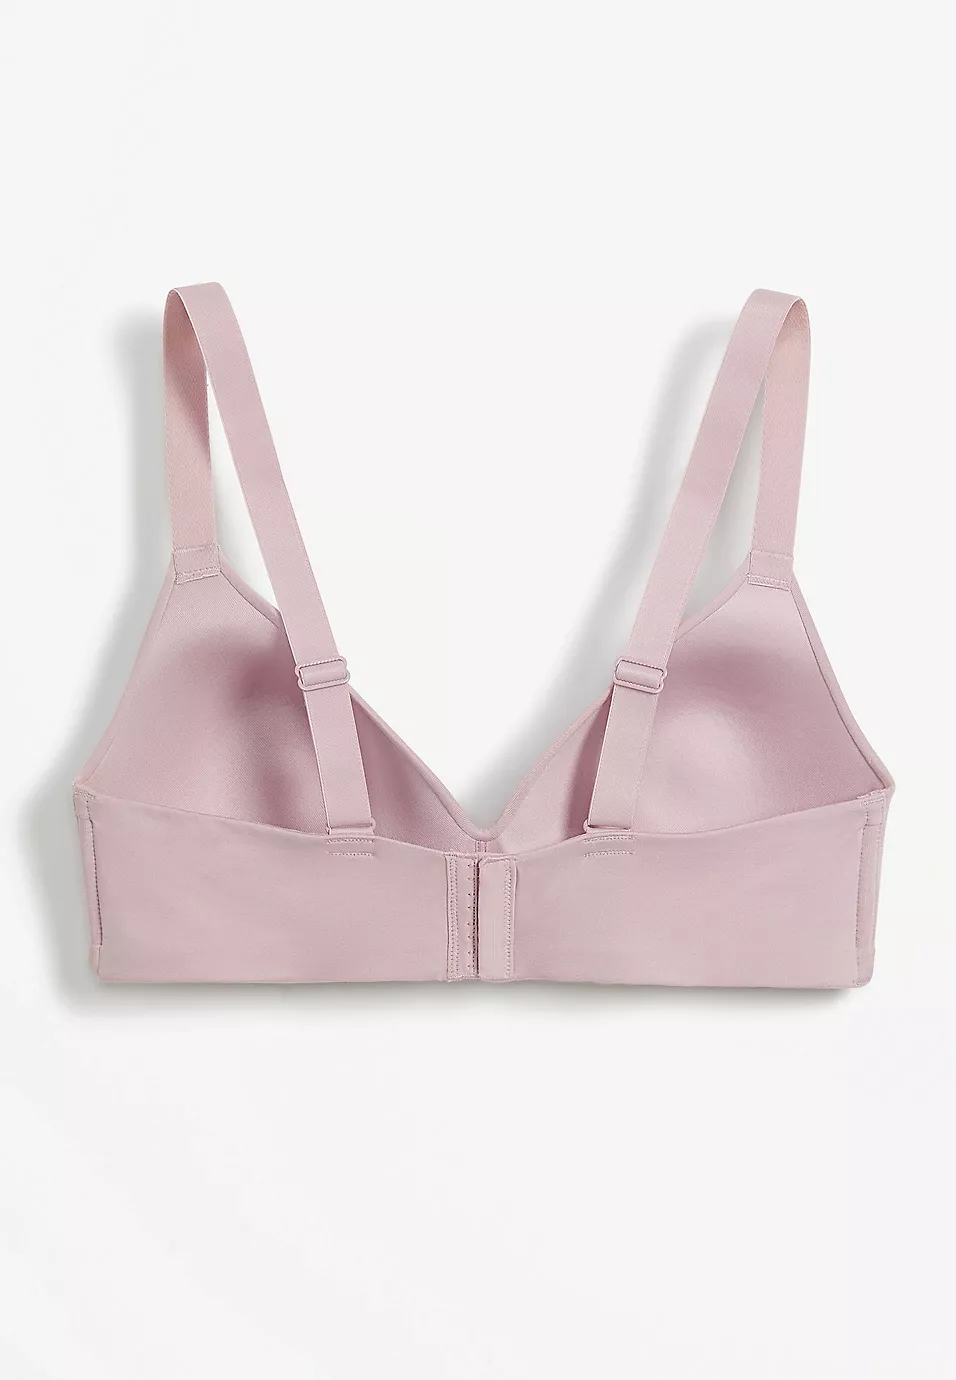 Maurices SmoothBliss Wireless Full Coverage Bra